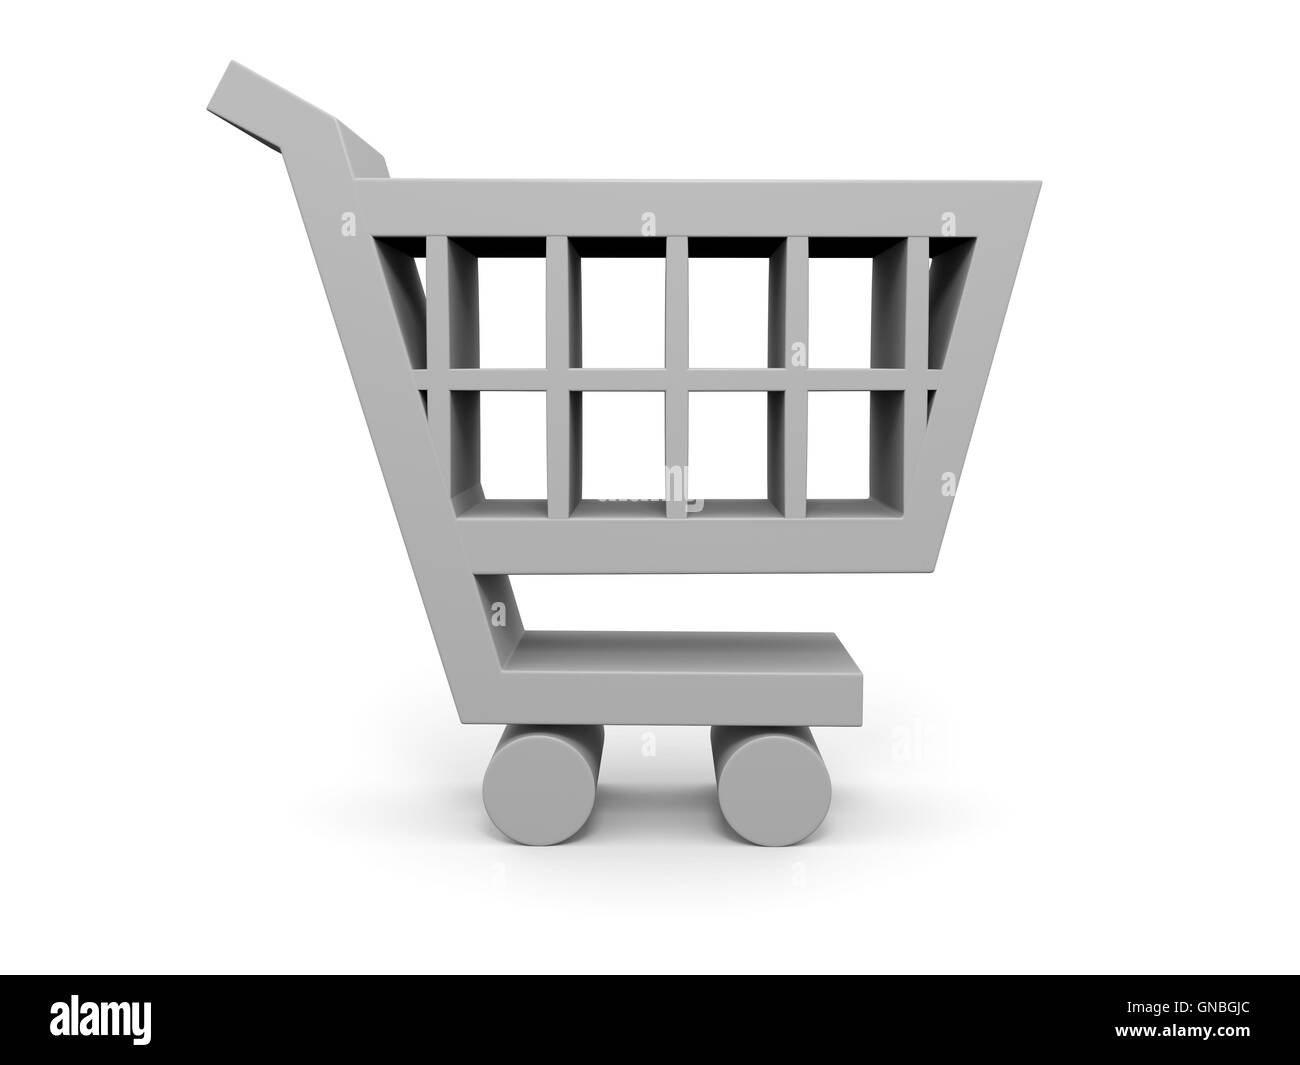 Shopping trolley 3D illustration Stock Photo